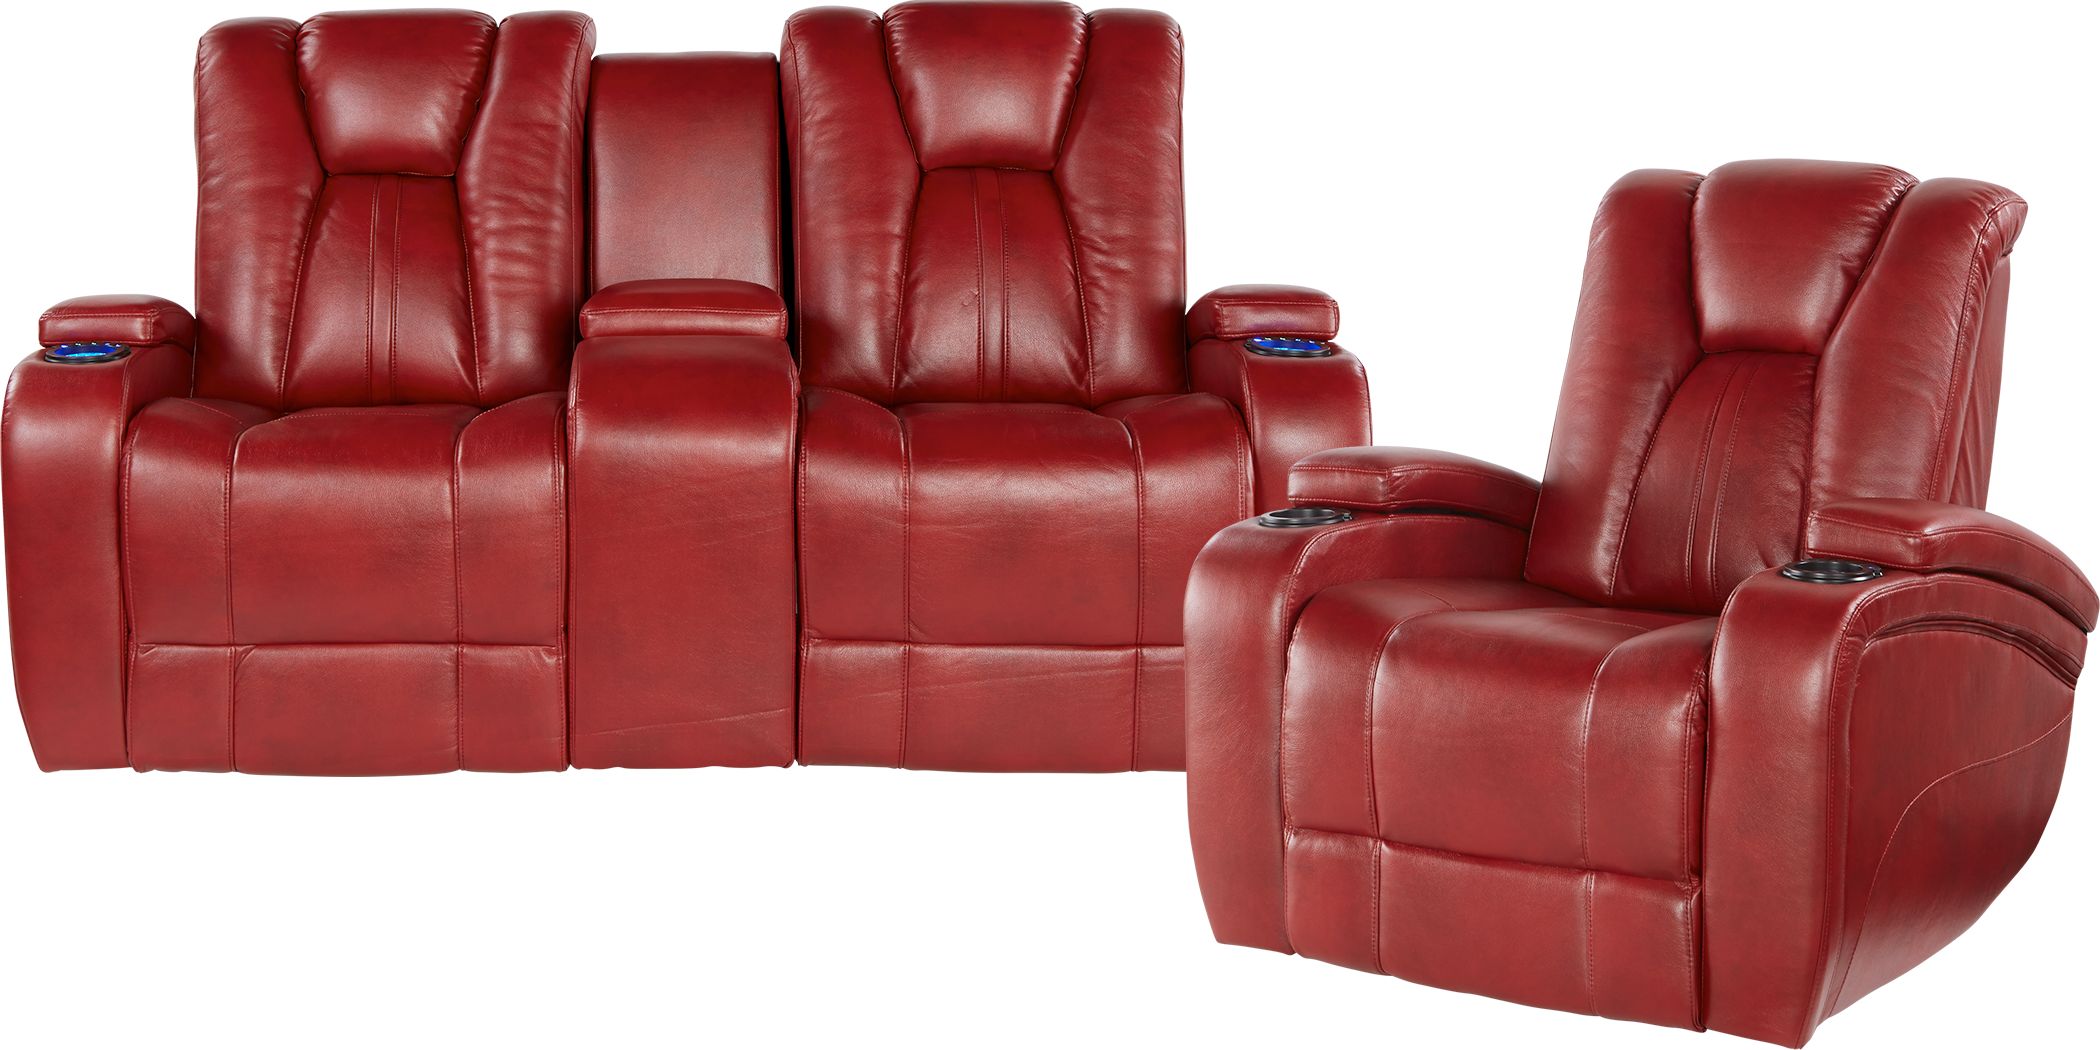 Kingvale Red 2 Pc Reclining Living Room